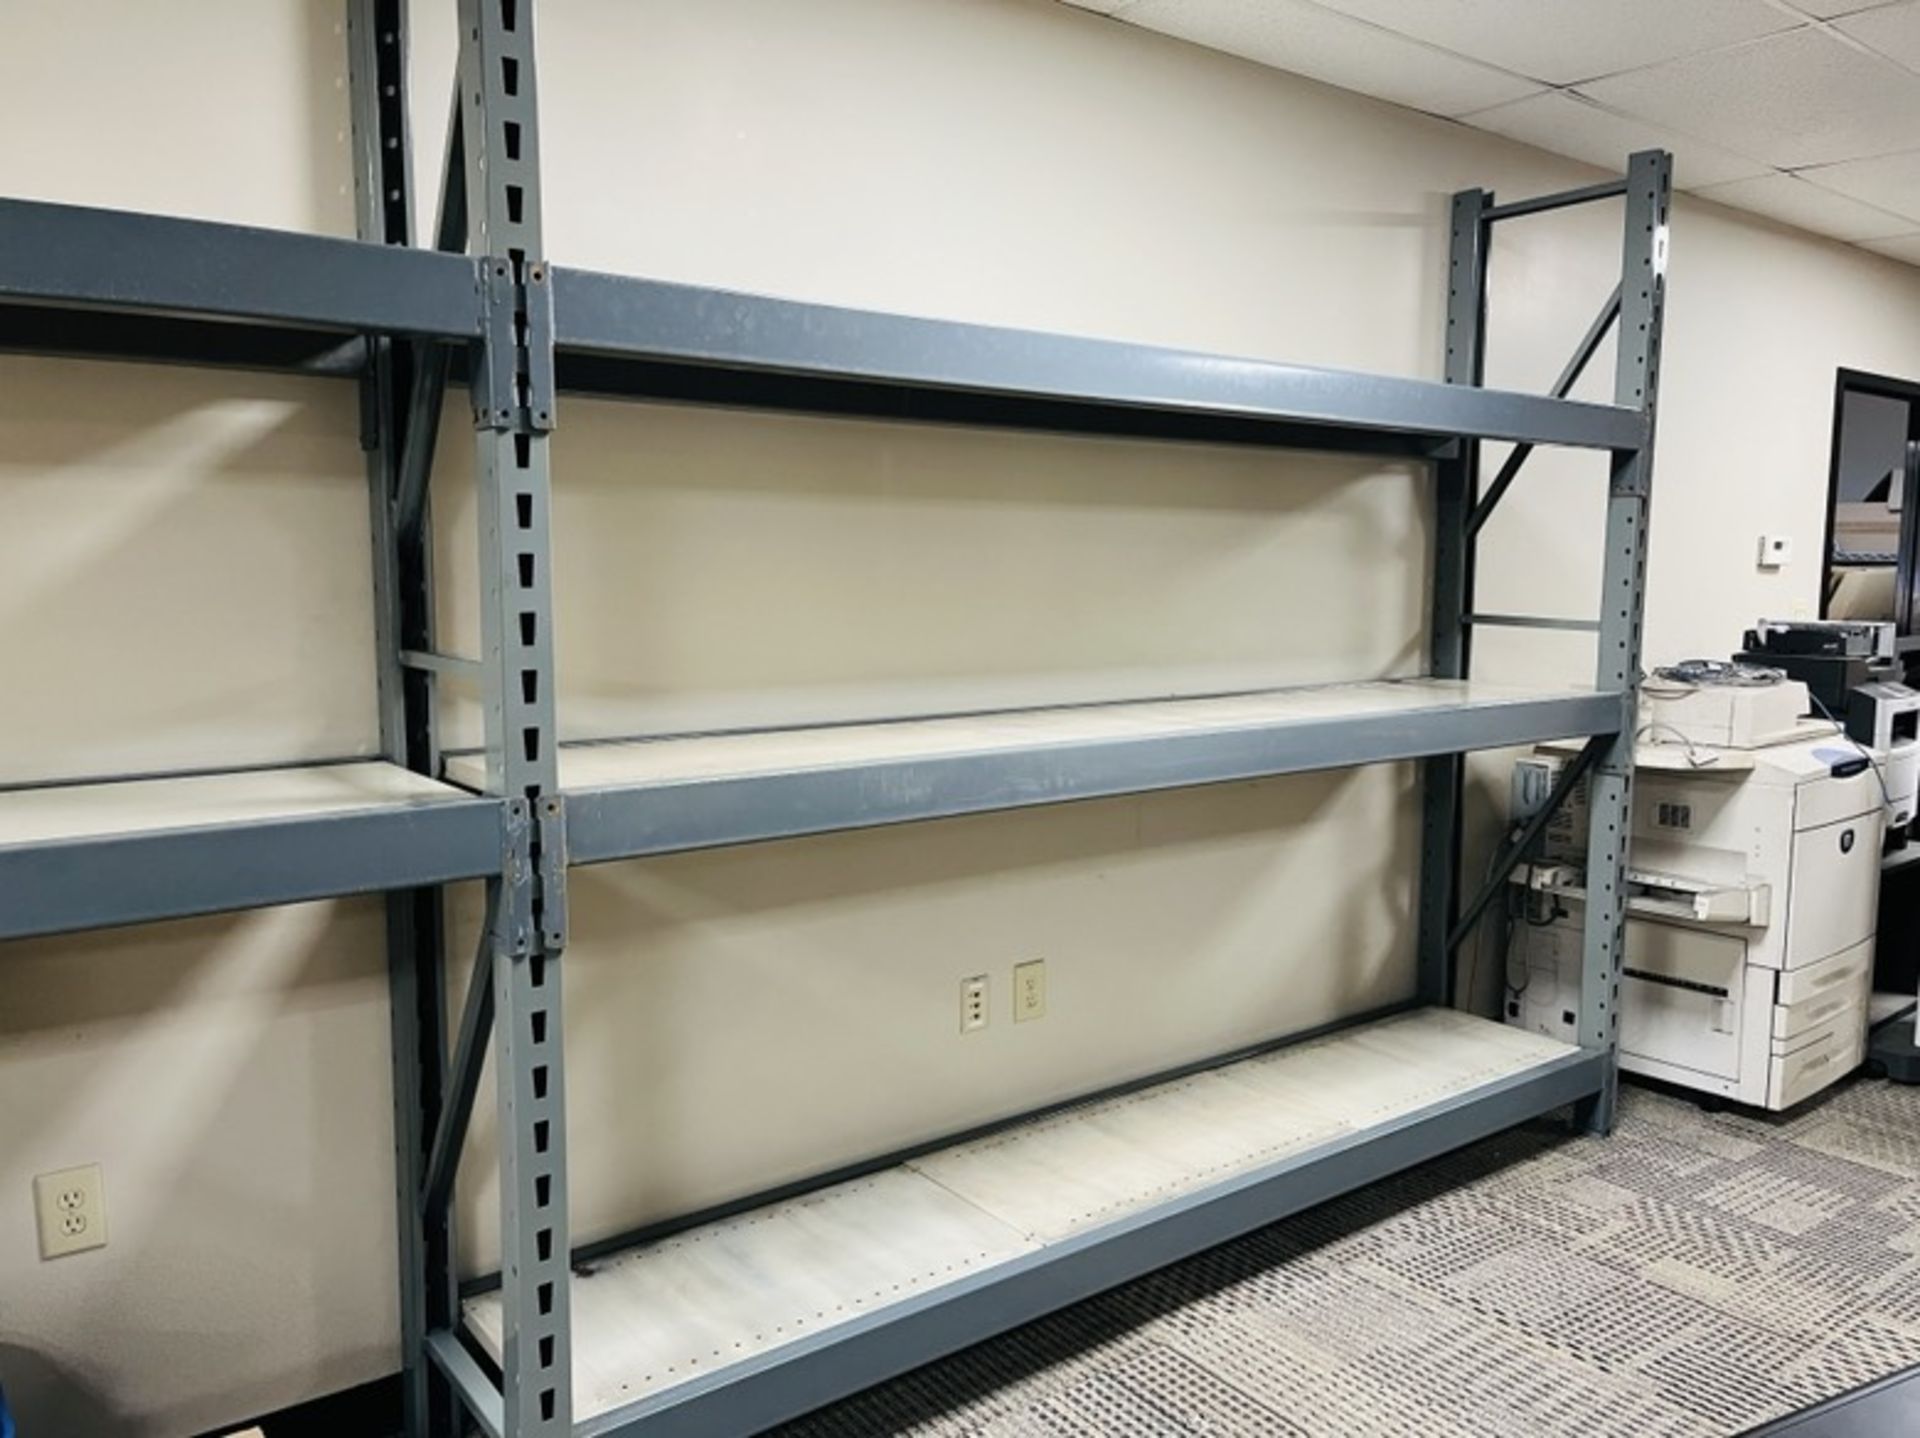 10 SECTION OF RETAIL/MERCHANDISE PALLET RACK SHELVING 8'H X 21.5"D X 108"L WITH 3 SHELVES - Image 4 of 4